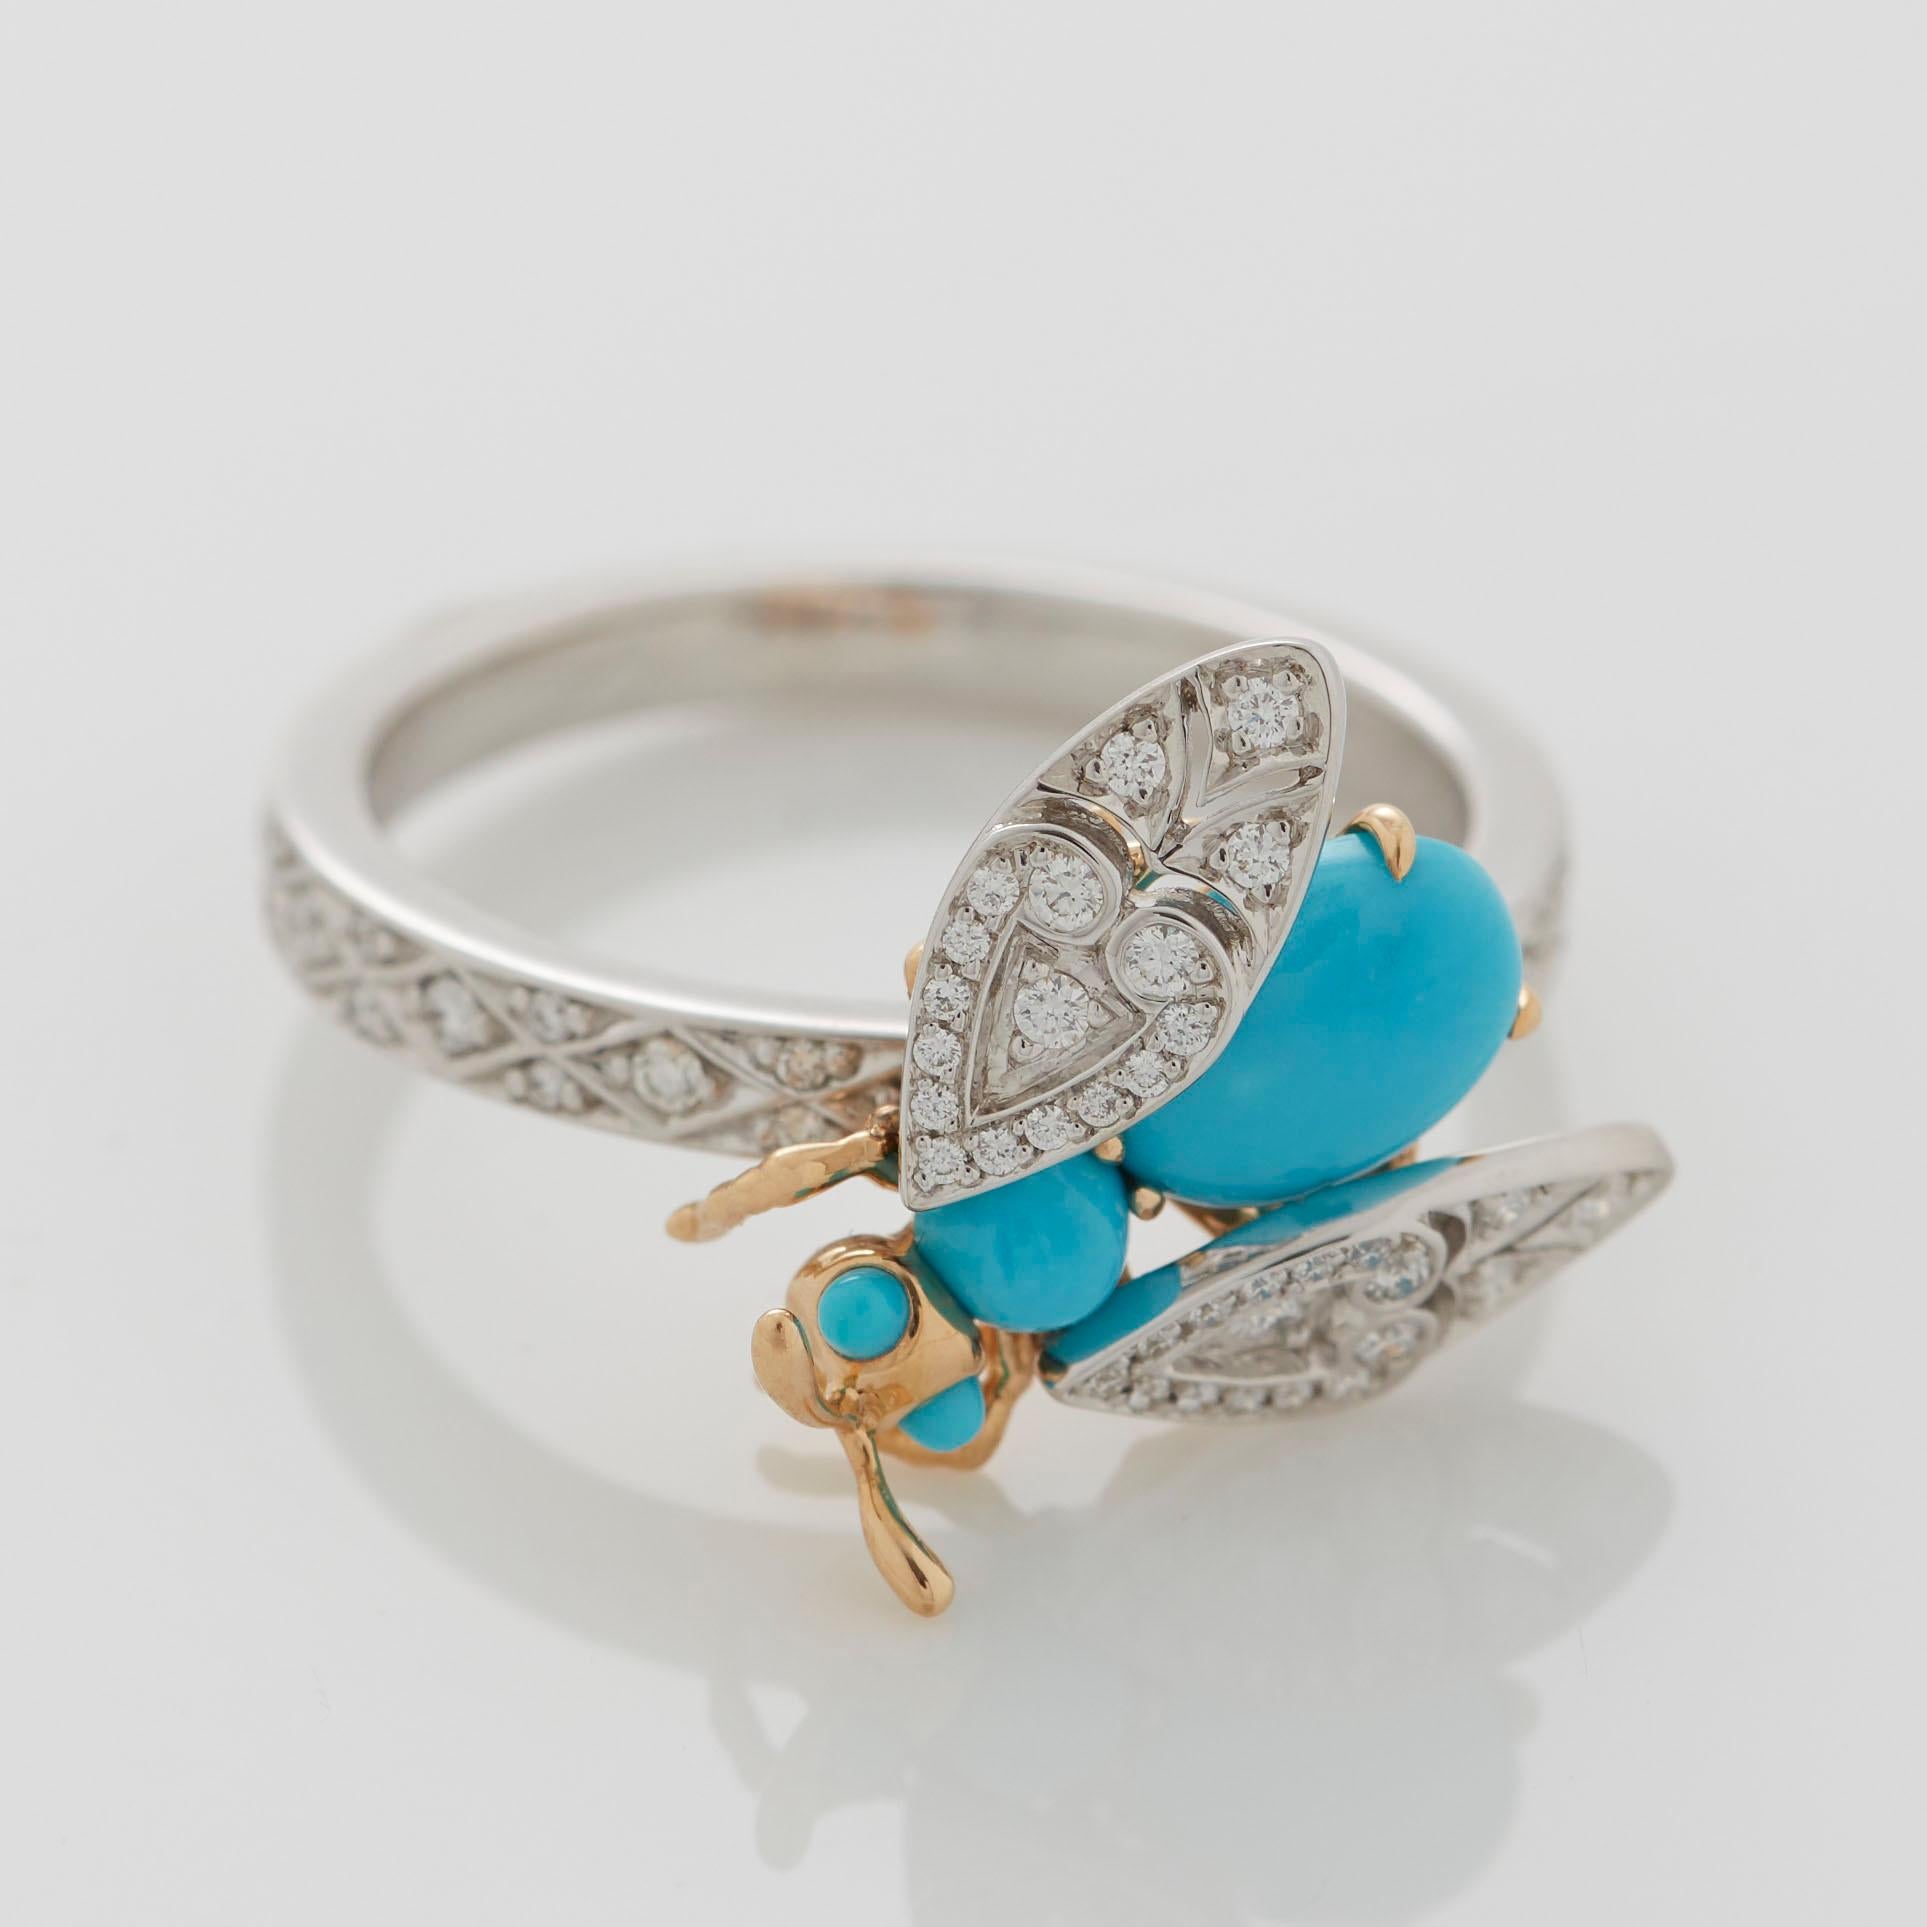 Garrard 'Enchanted Palace' 18 Karat Gold Diamond and Turquoise Cabachon Ring In New Condition For Sale In London, London